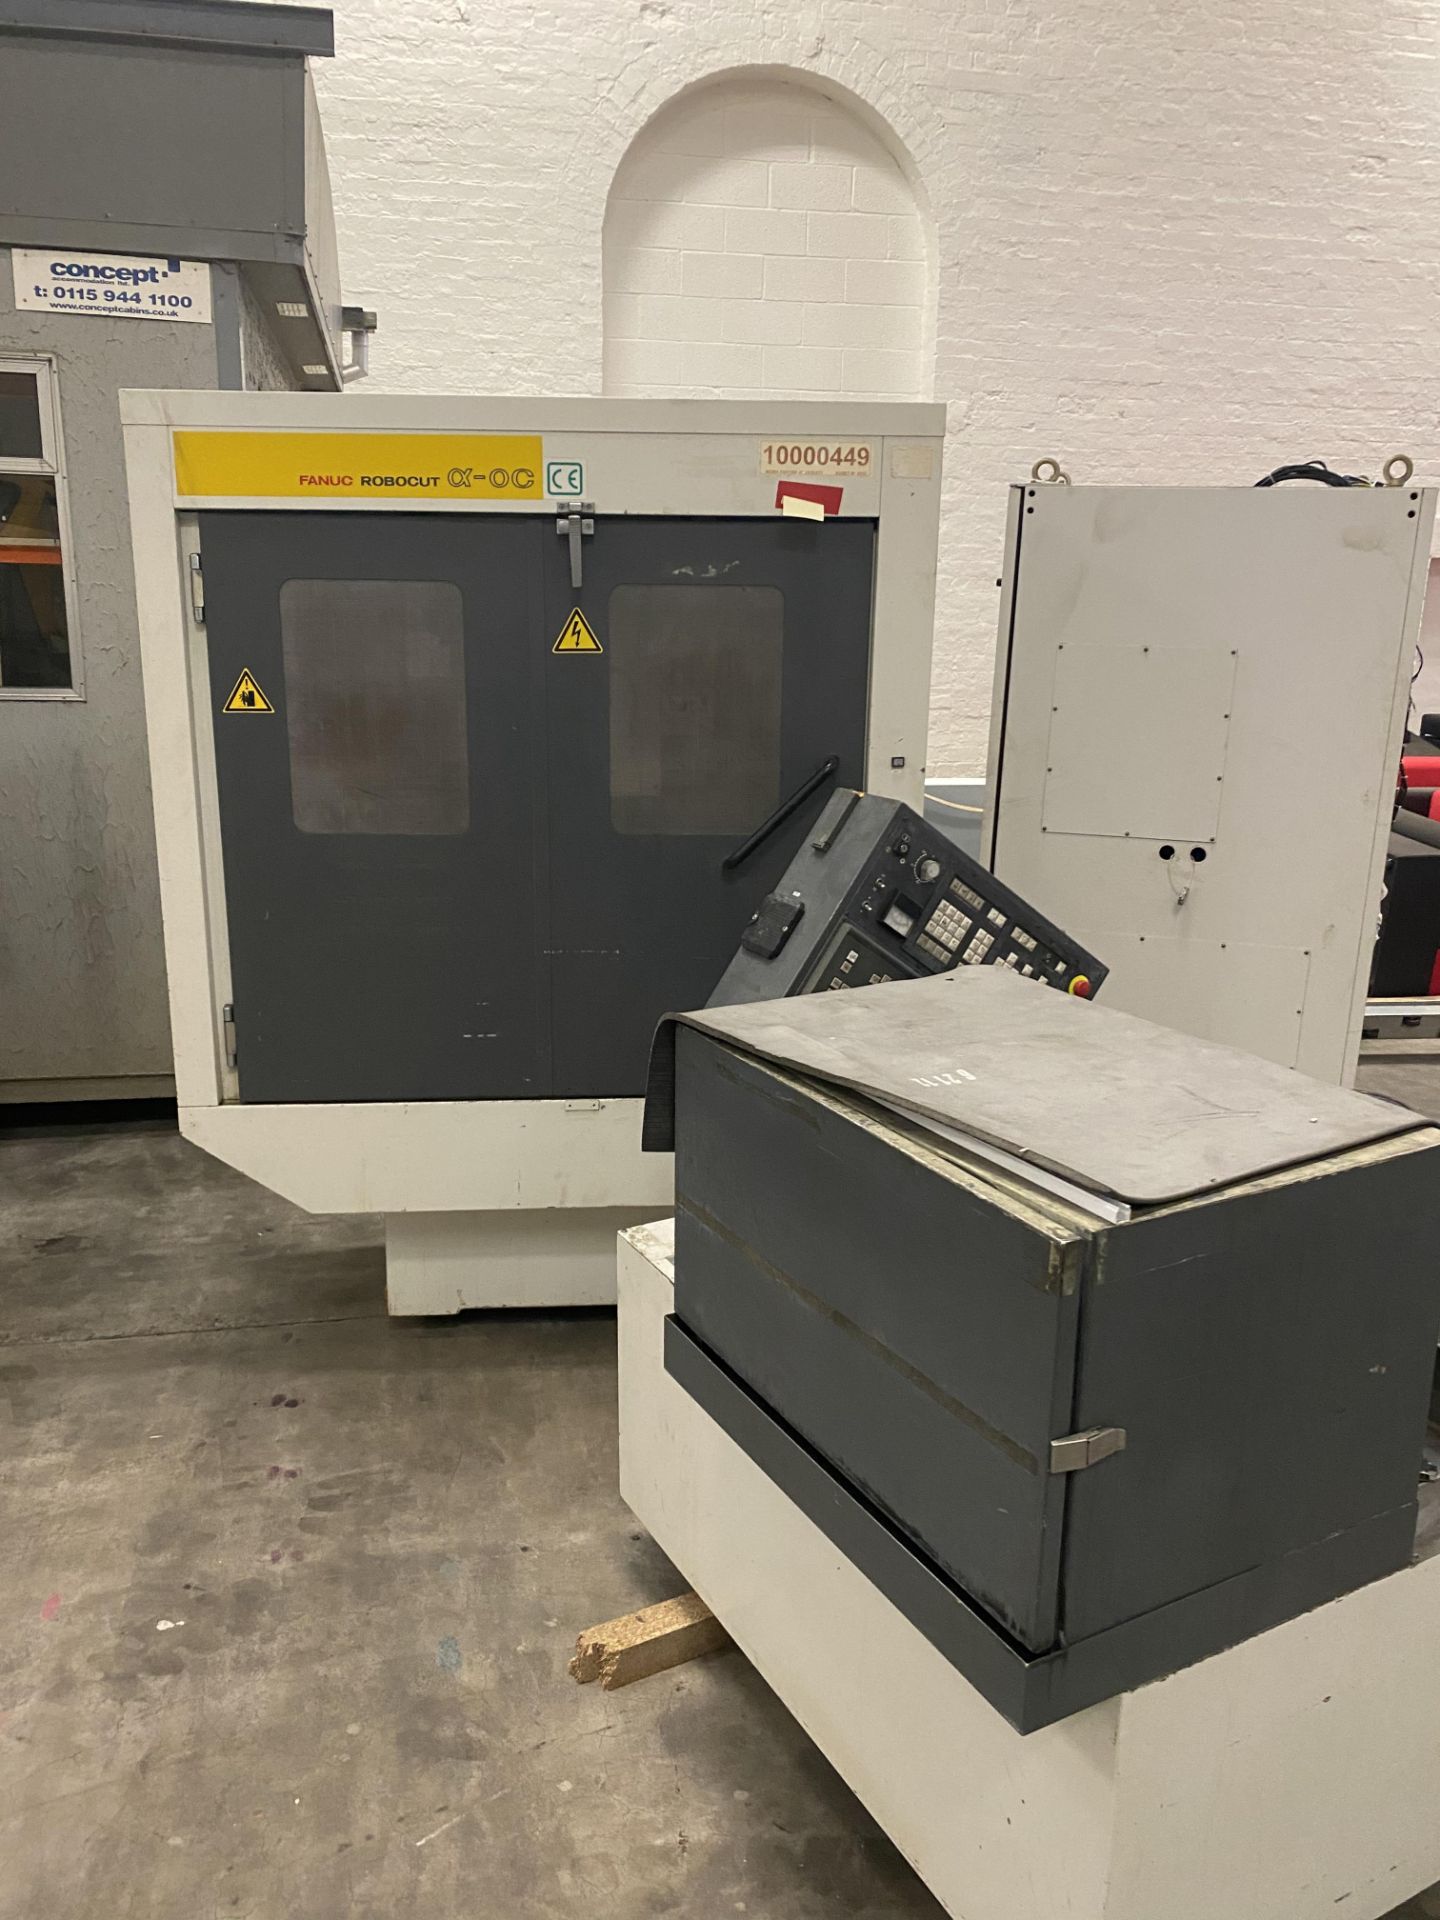 Fanuc Robocut Wire EDM Machine, year of manufacture 1996, free loading onto purchasers transport - - Image 2 of 8